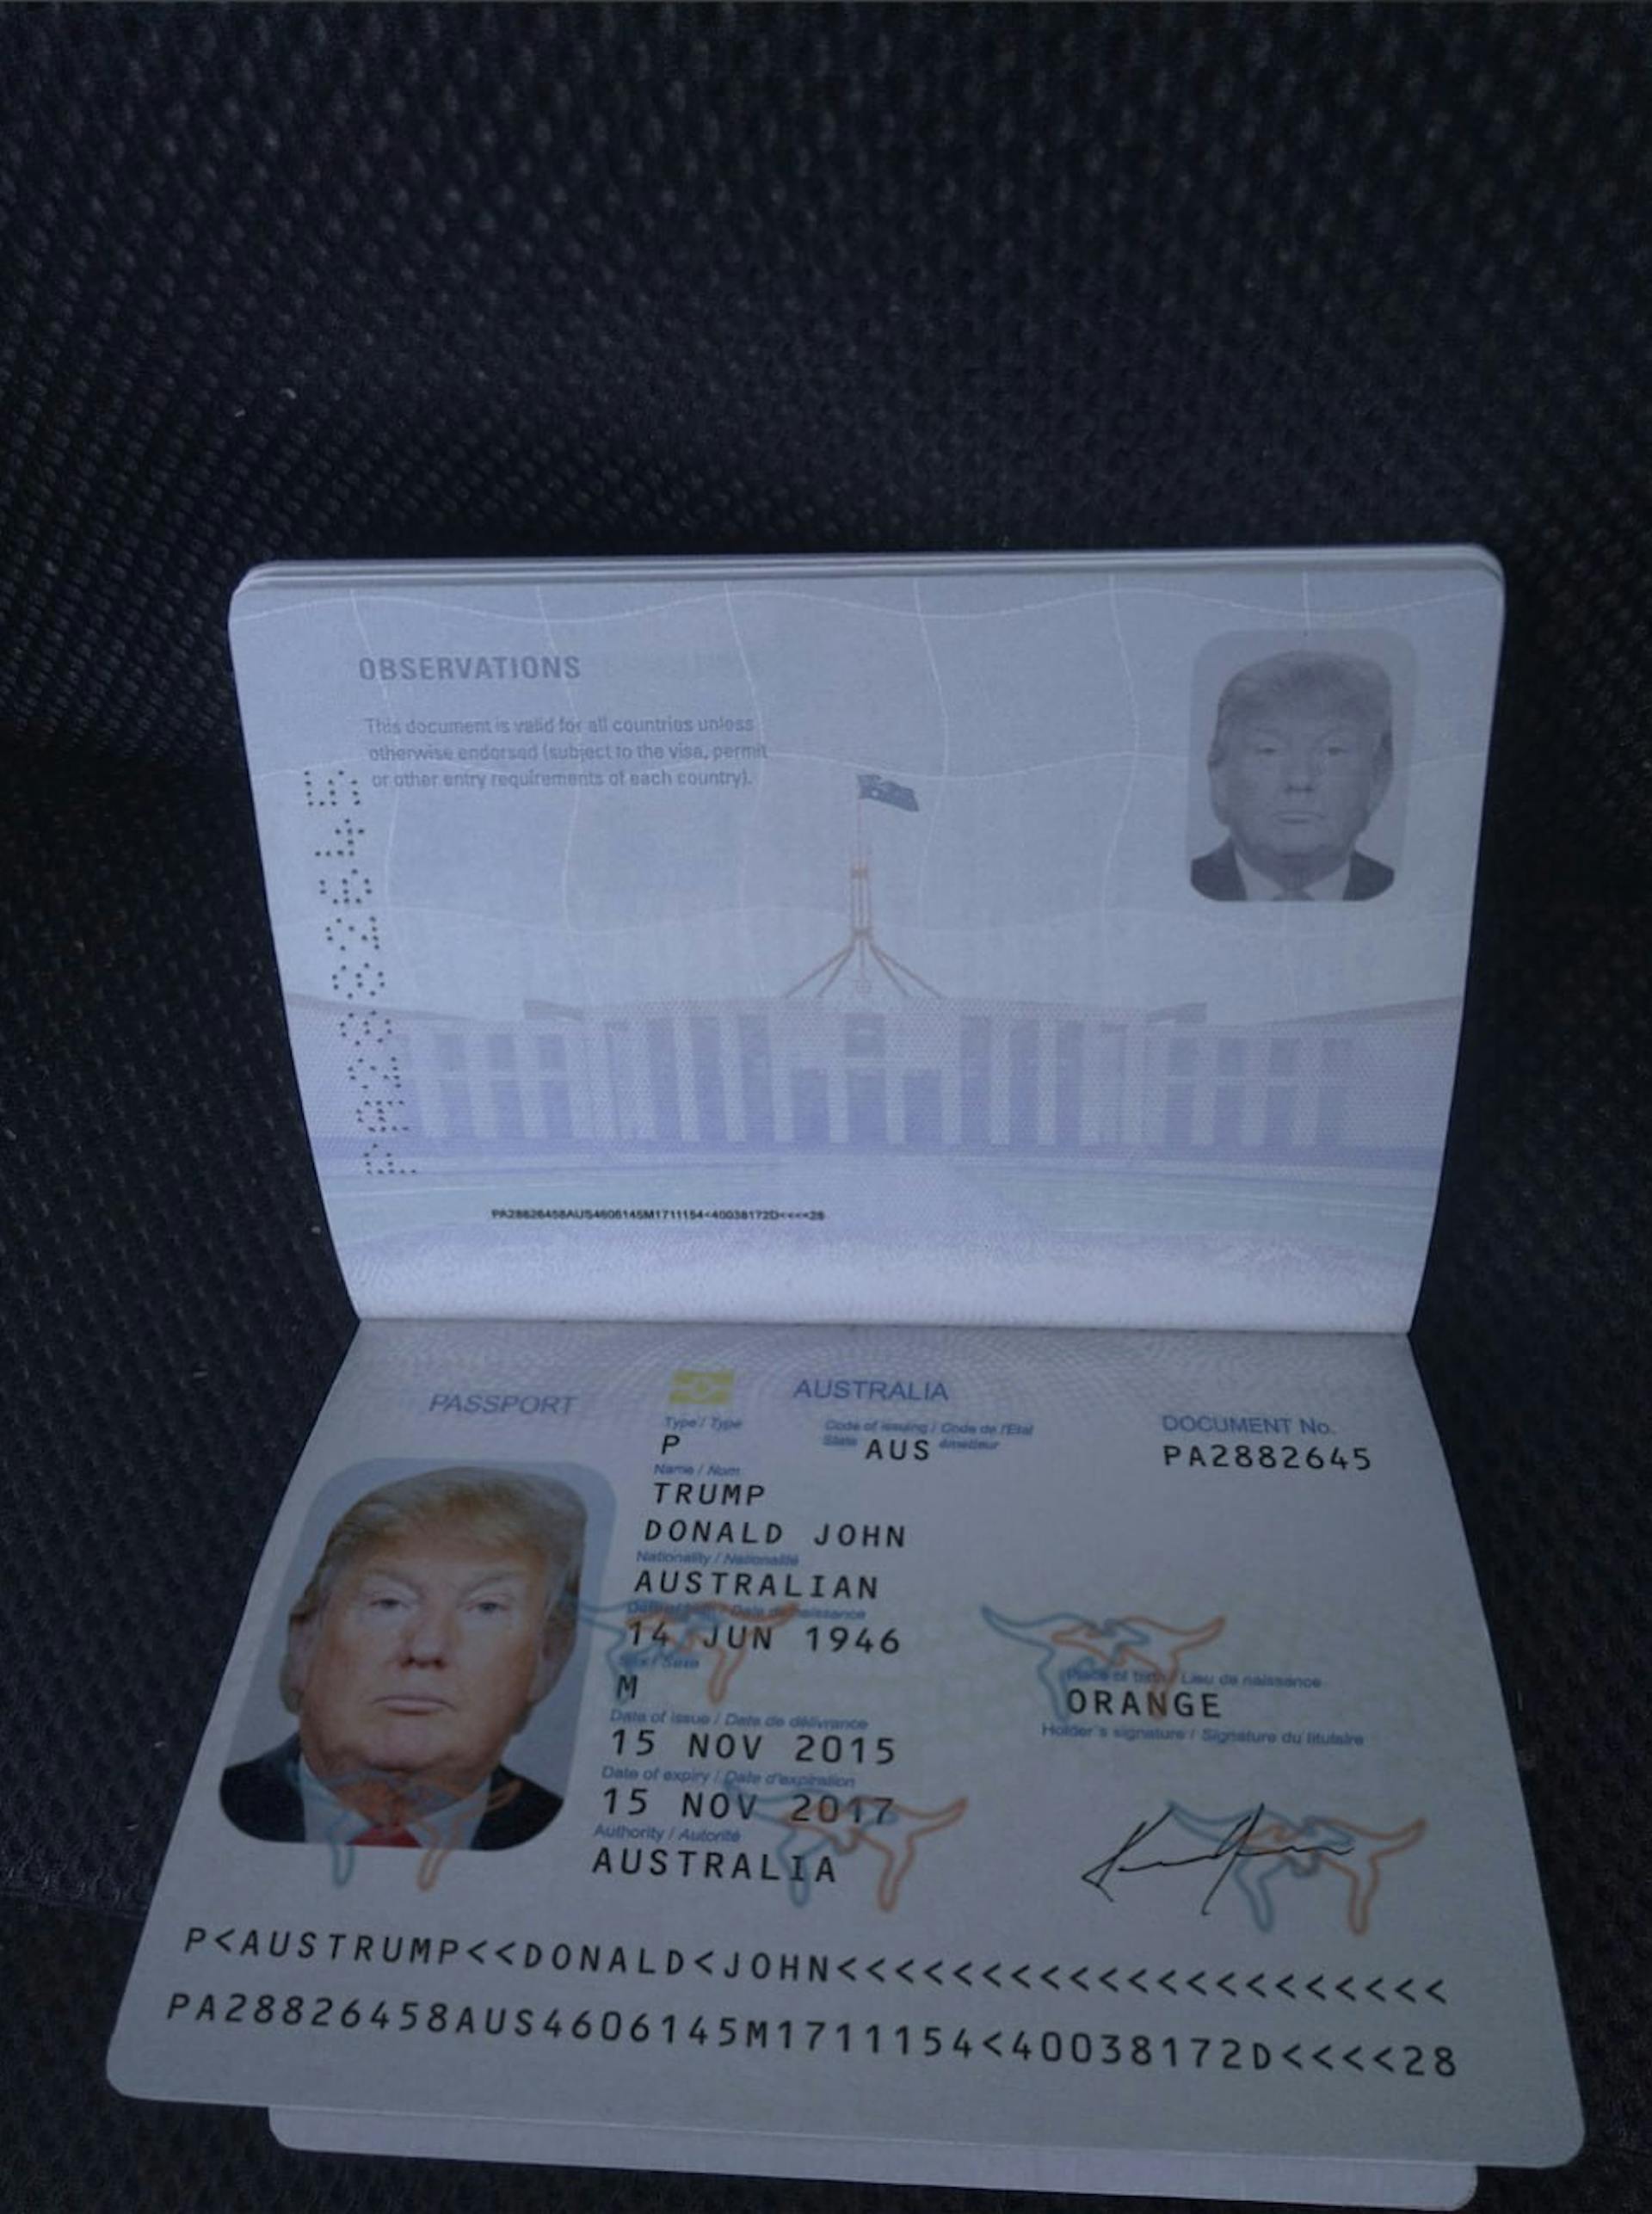 A fake Australian passport using the details of former U.S. president Donald Trump appearing laid out on some fabric. Source: Telegram